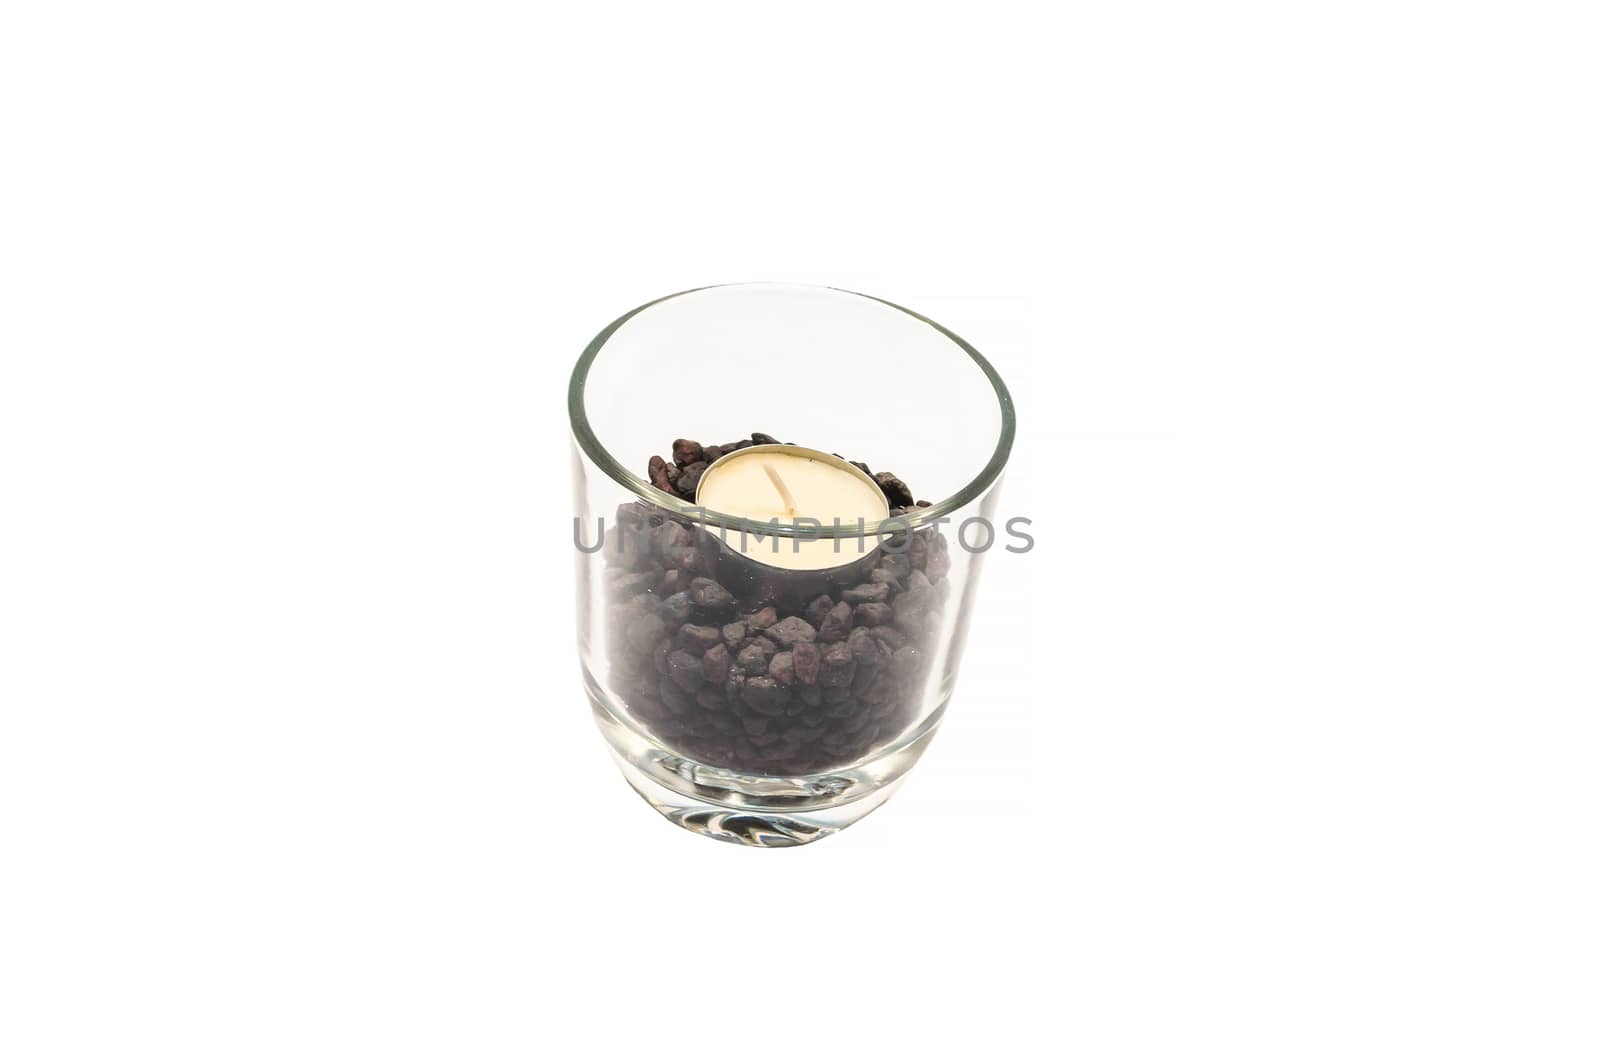 Candle in a transparent glass on a white background